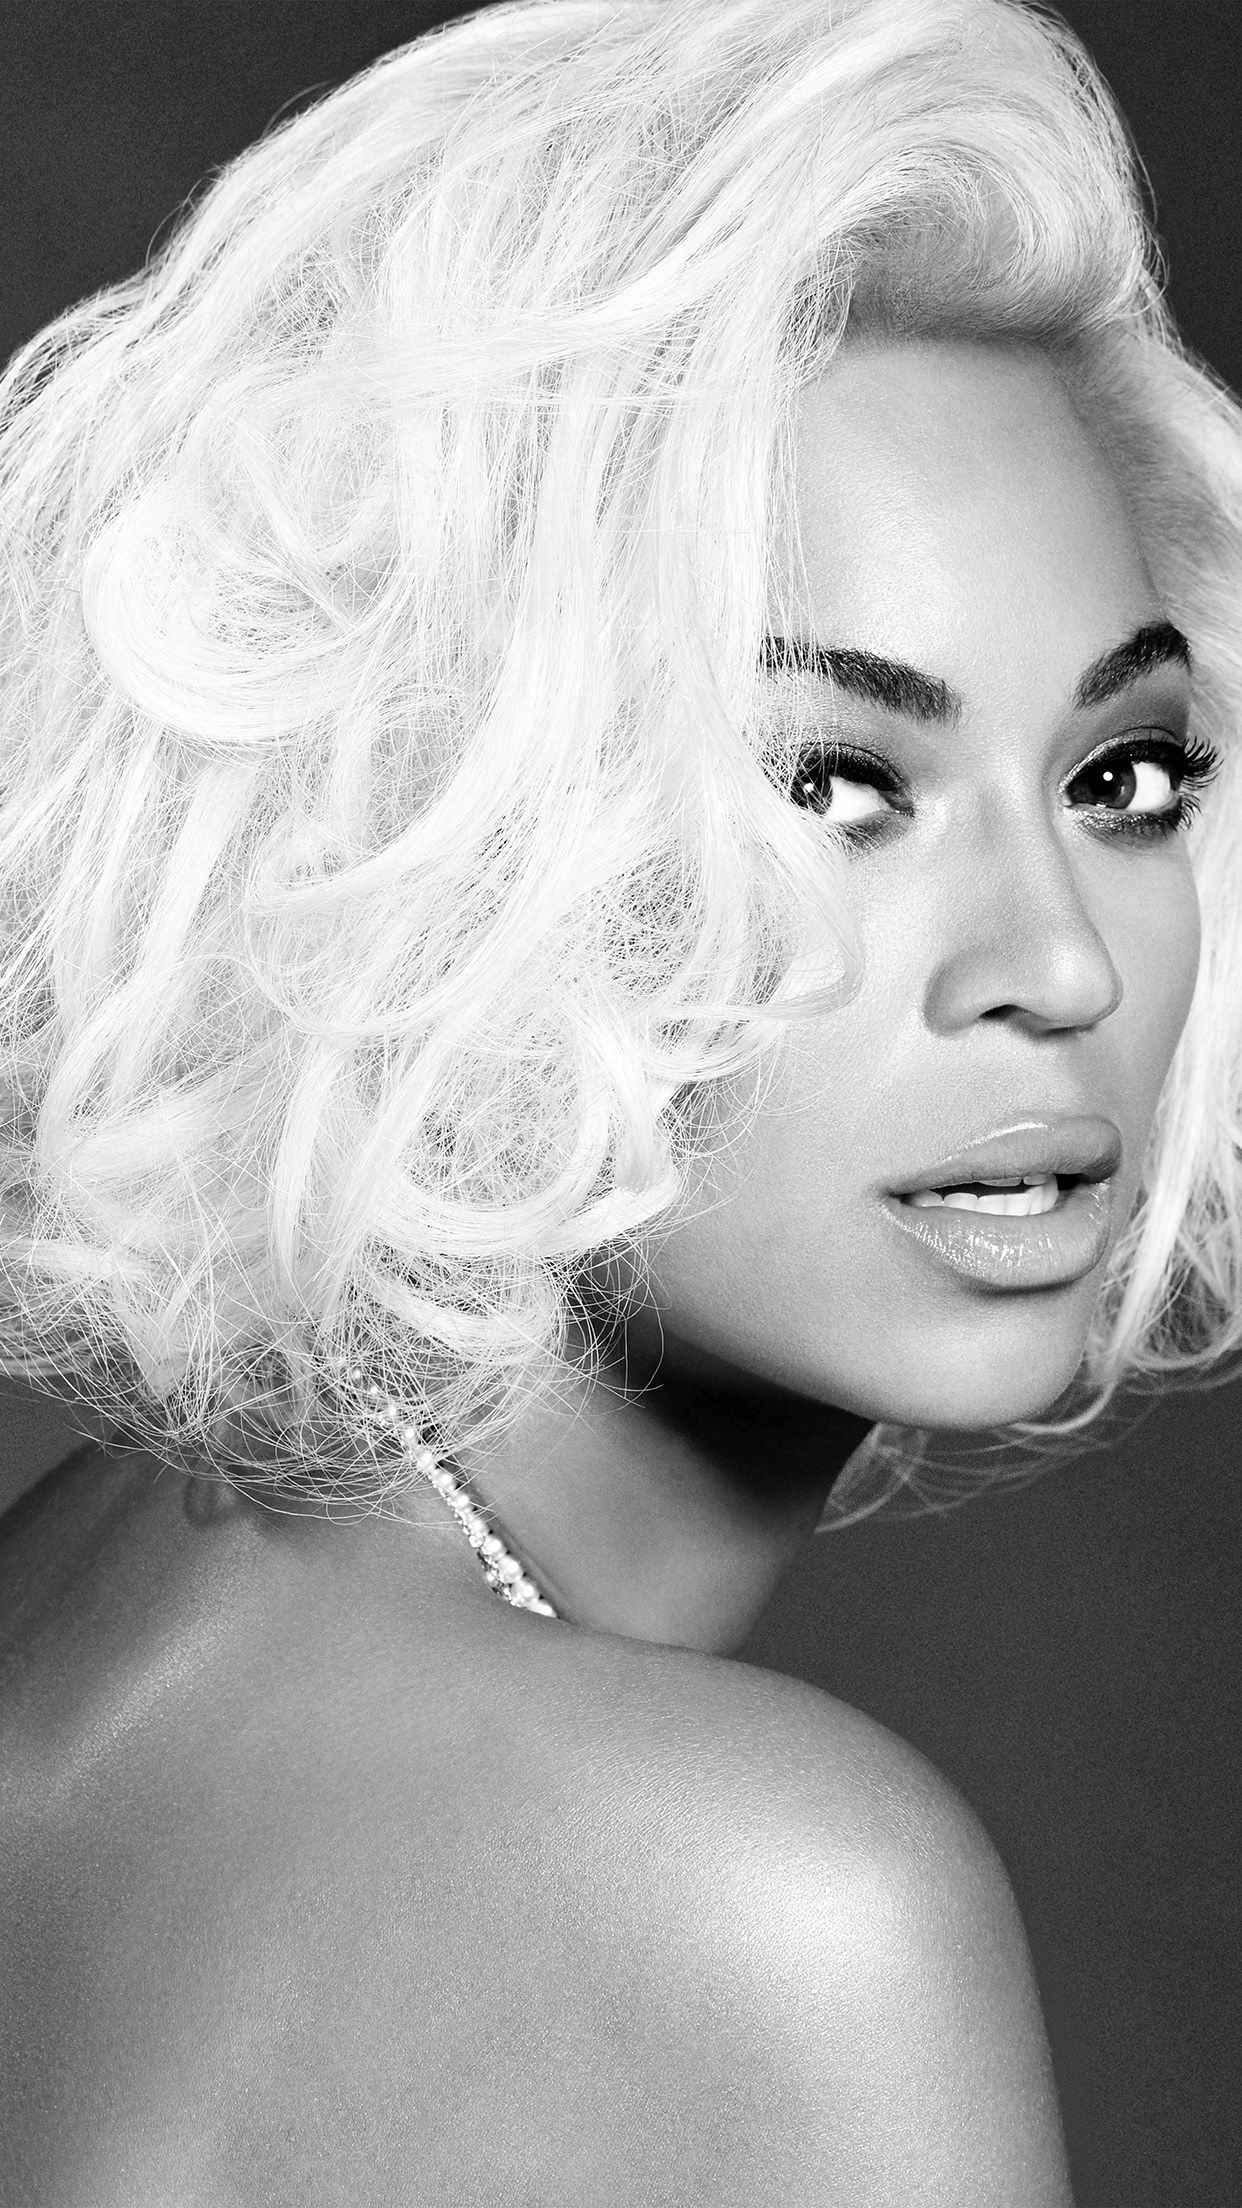 A black and white photo of beyonce - Beyonce